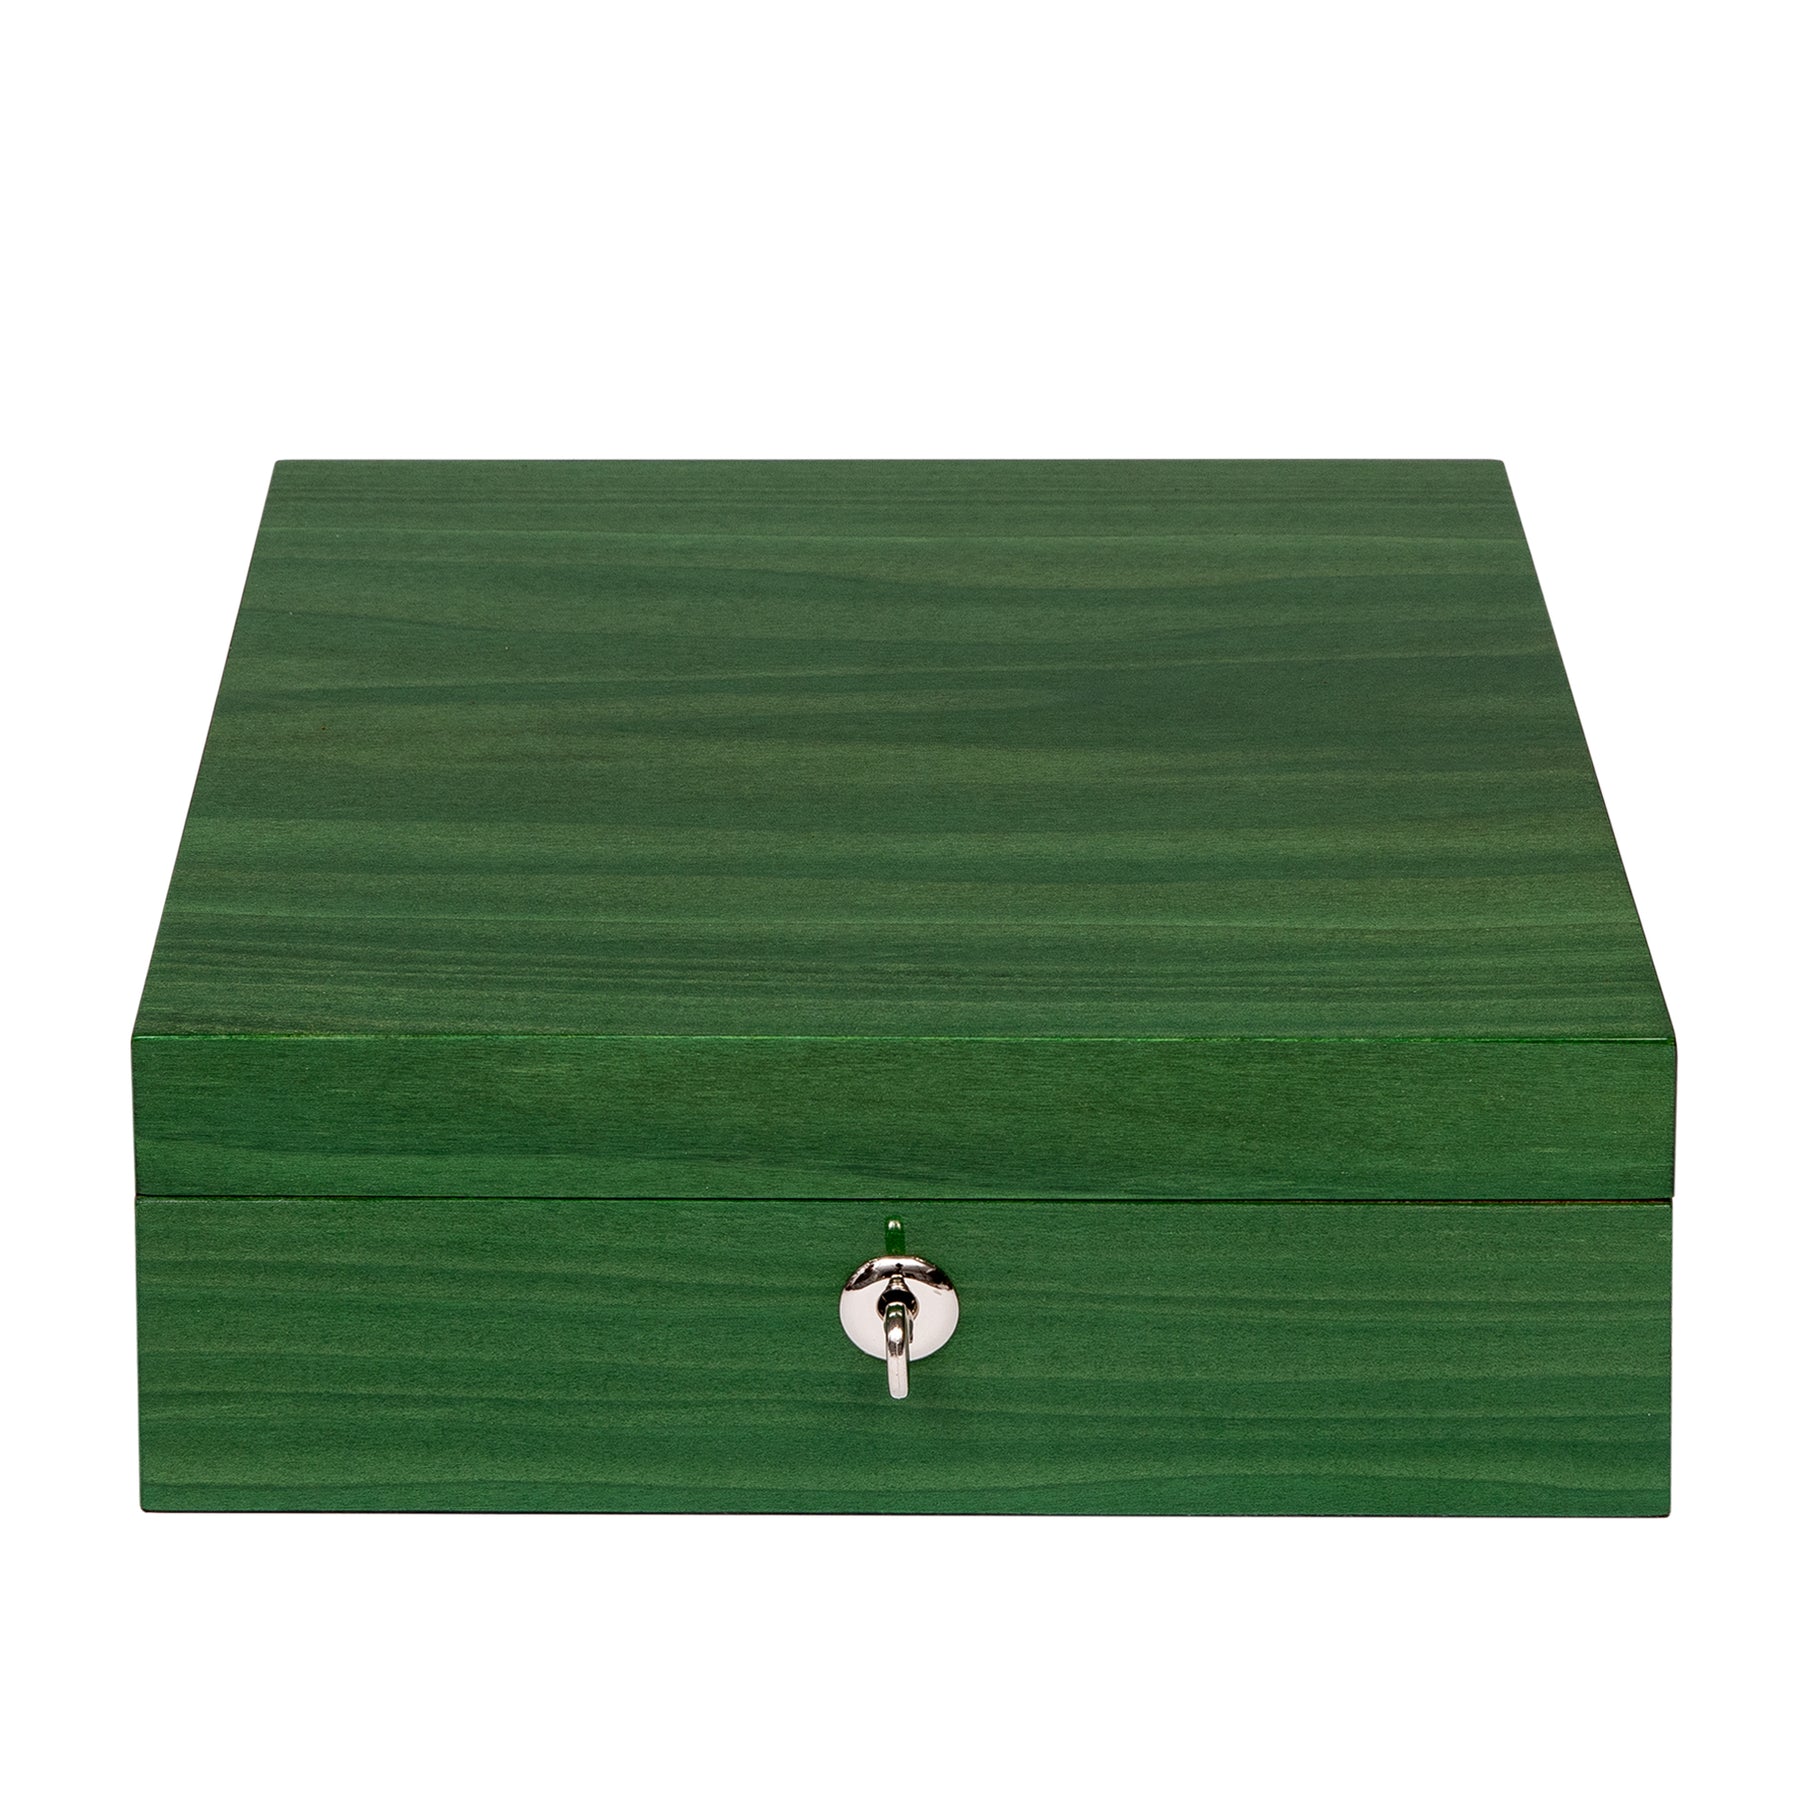 Rapport - Heritage 4 Watch Box in Green Lacquer | L405